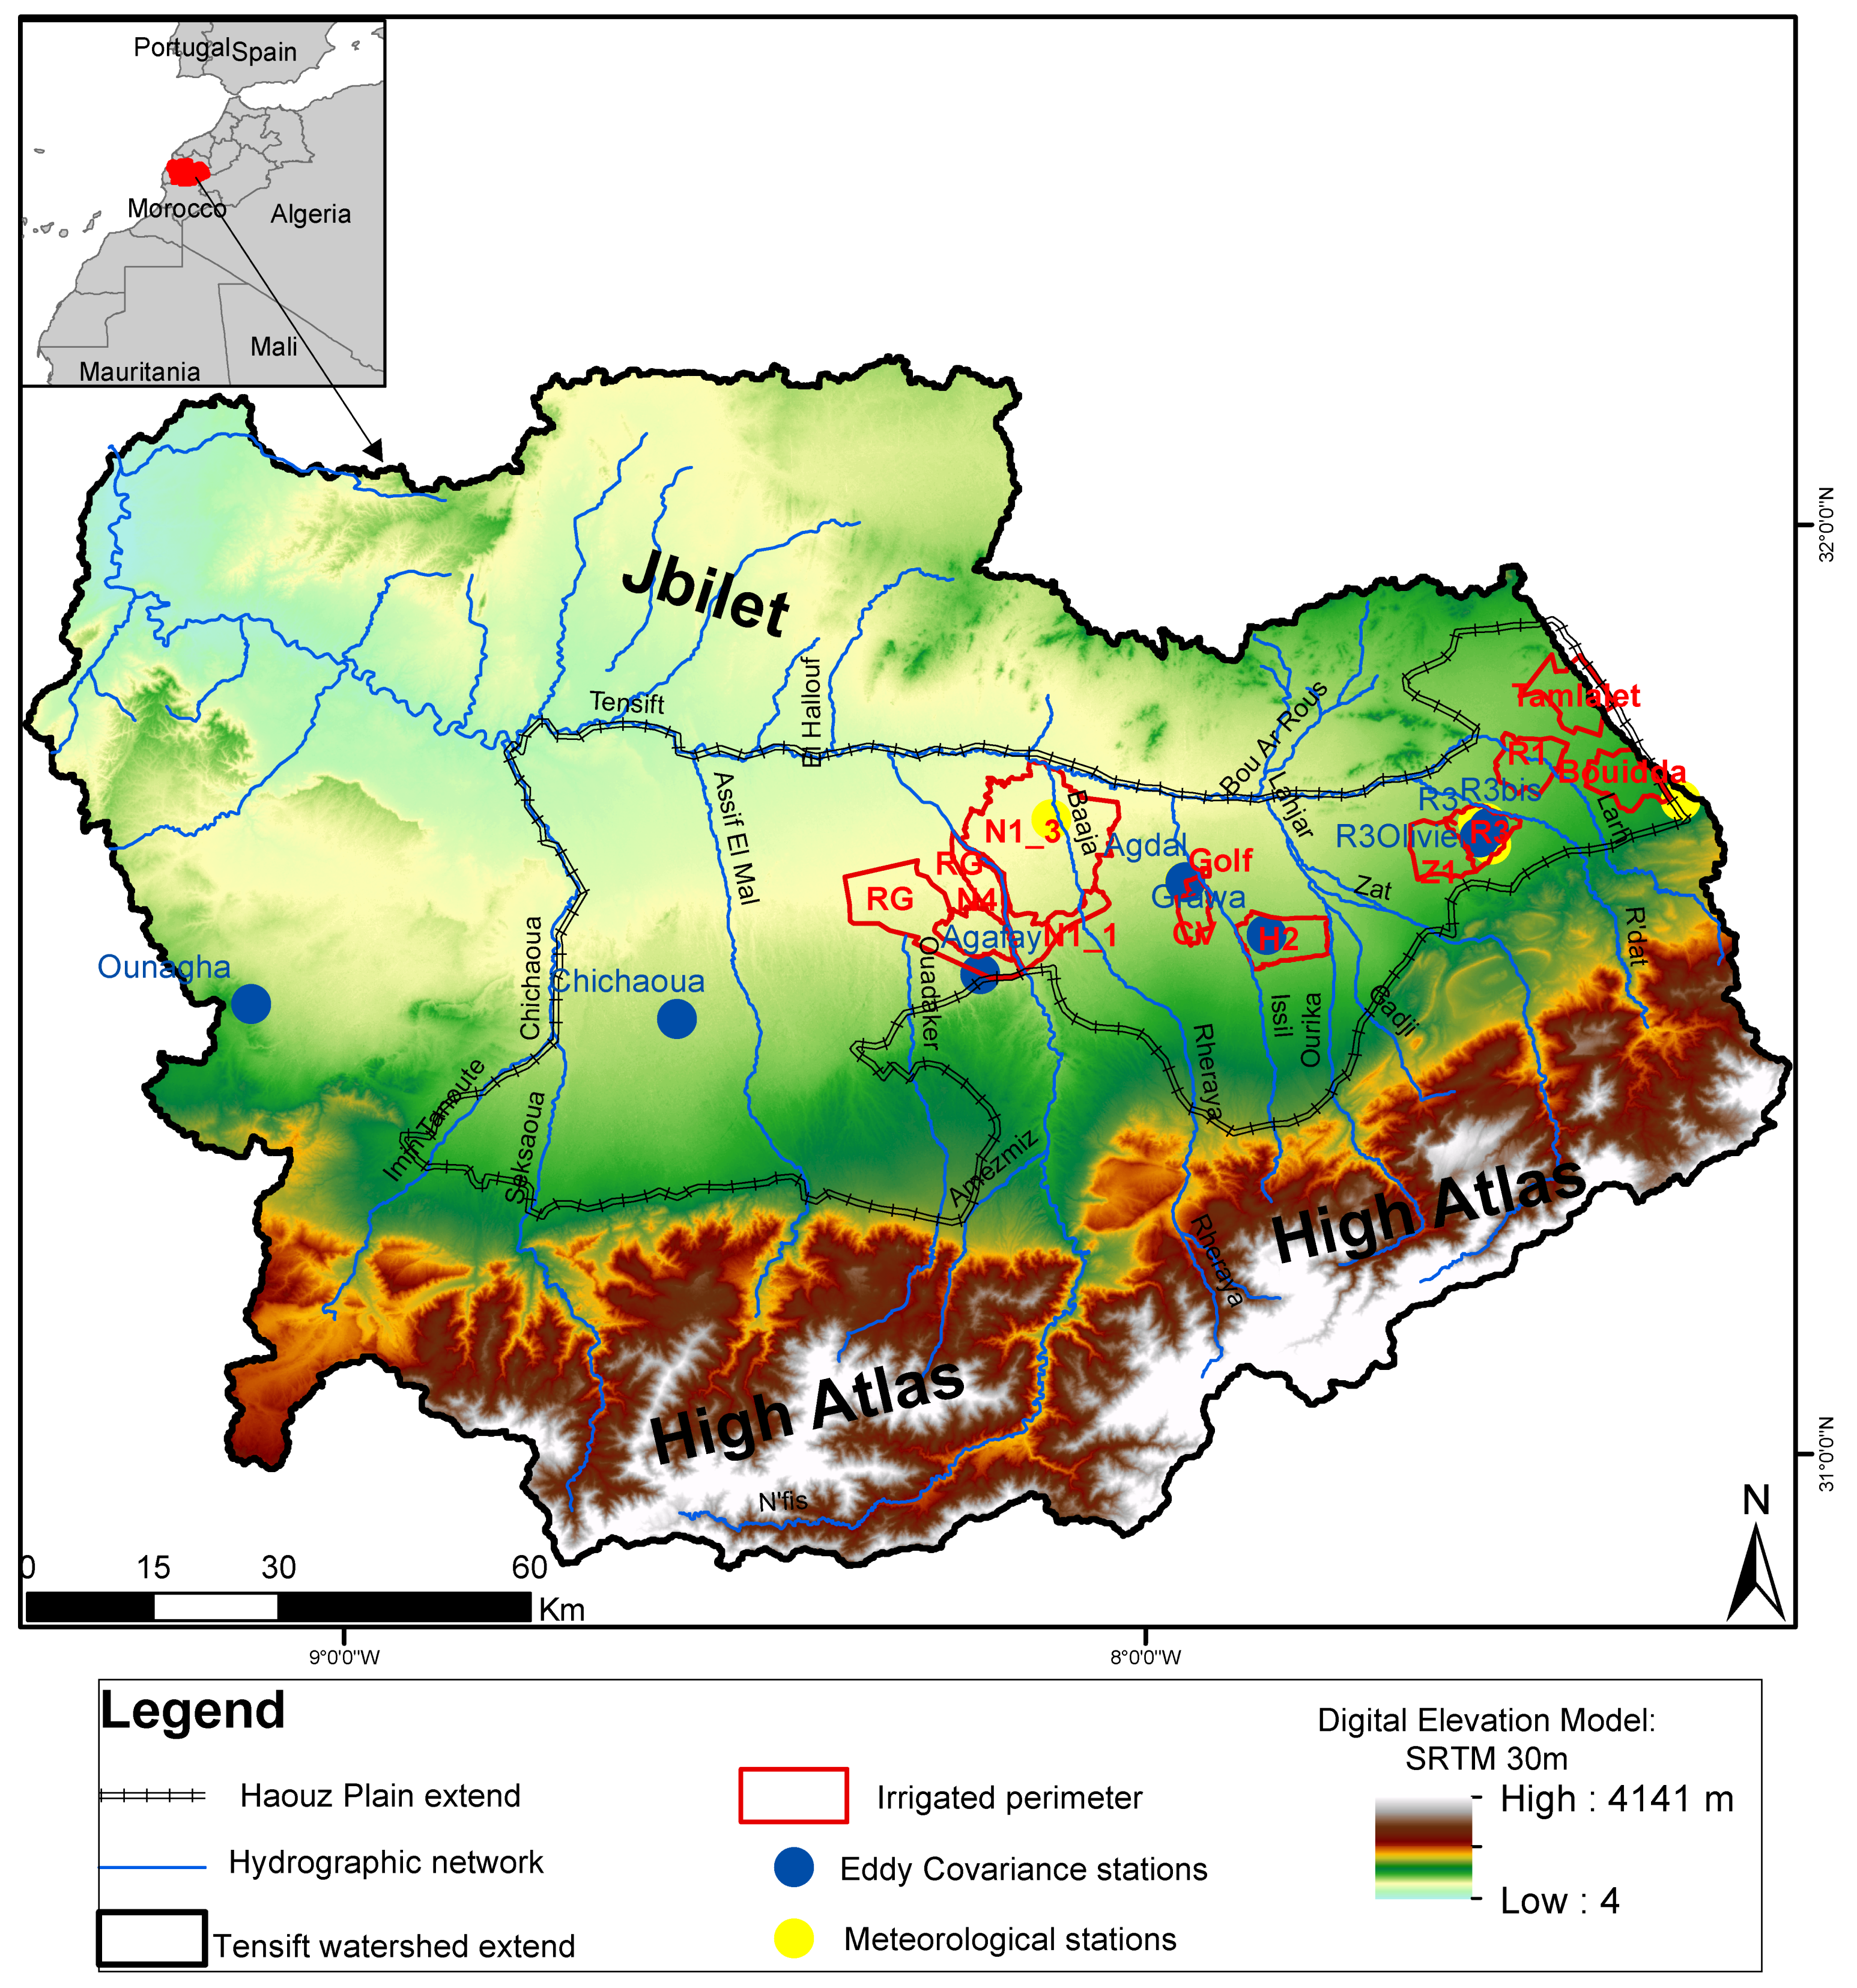 Frontiers  Spatial and Temporal Resolution Improvement of Actual  Evapotranspiration Maps Using Landsat and MODIS Data Fusion